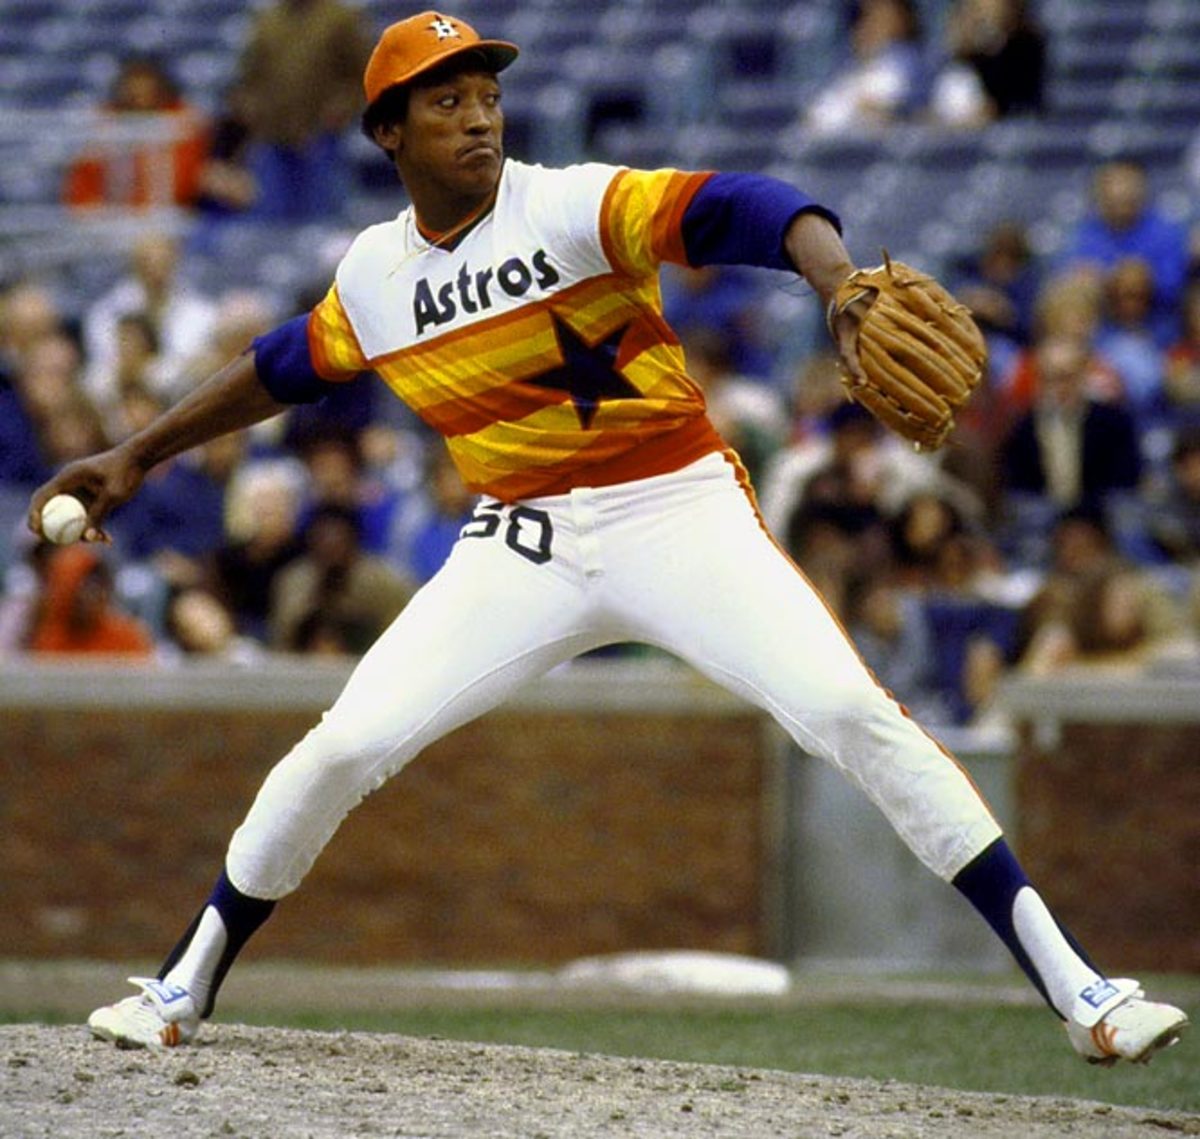 The Top Ten MLB Pitchers of the 1970s